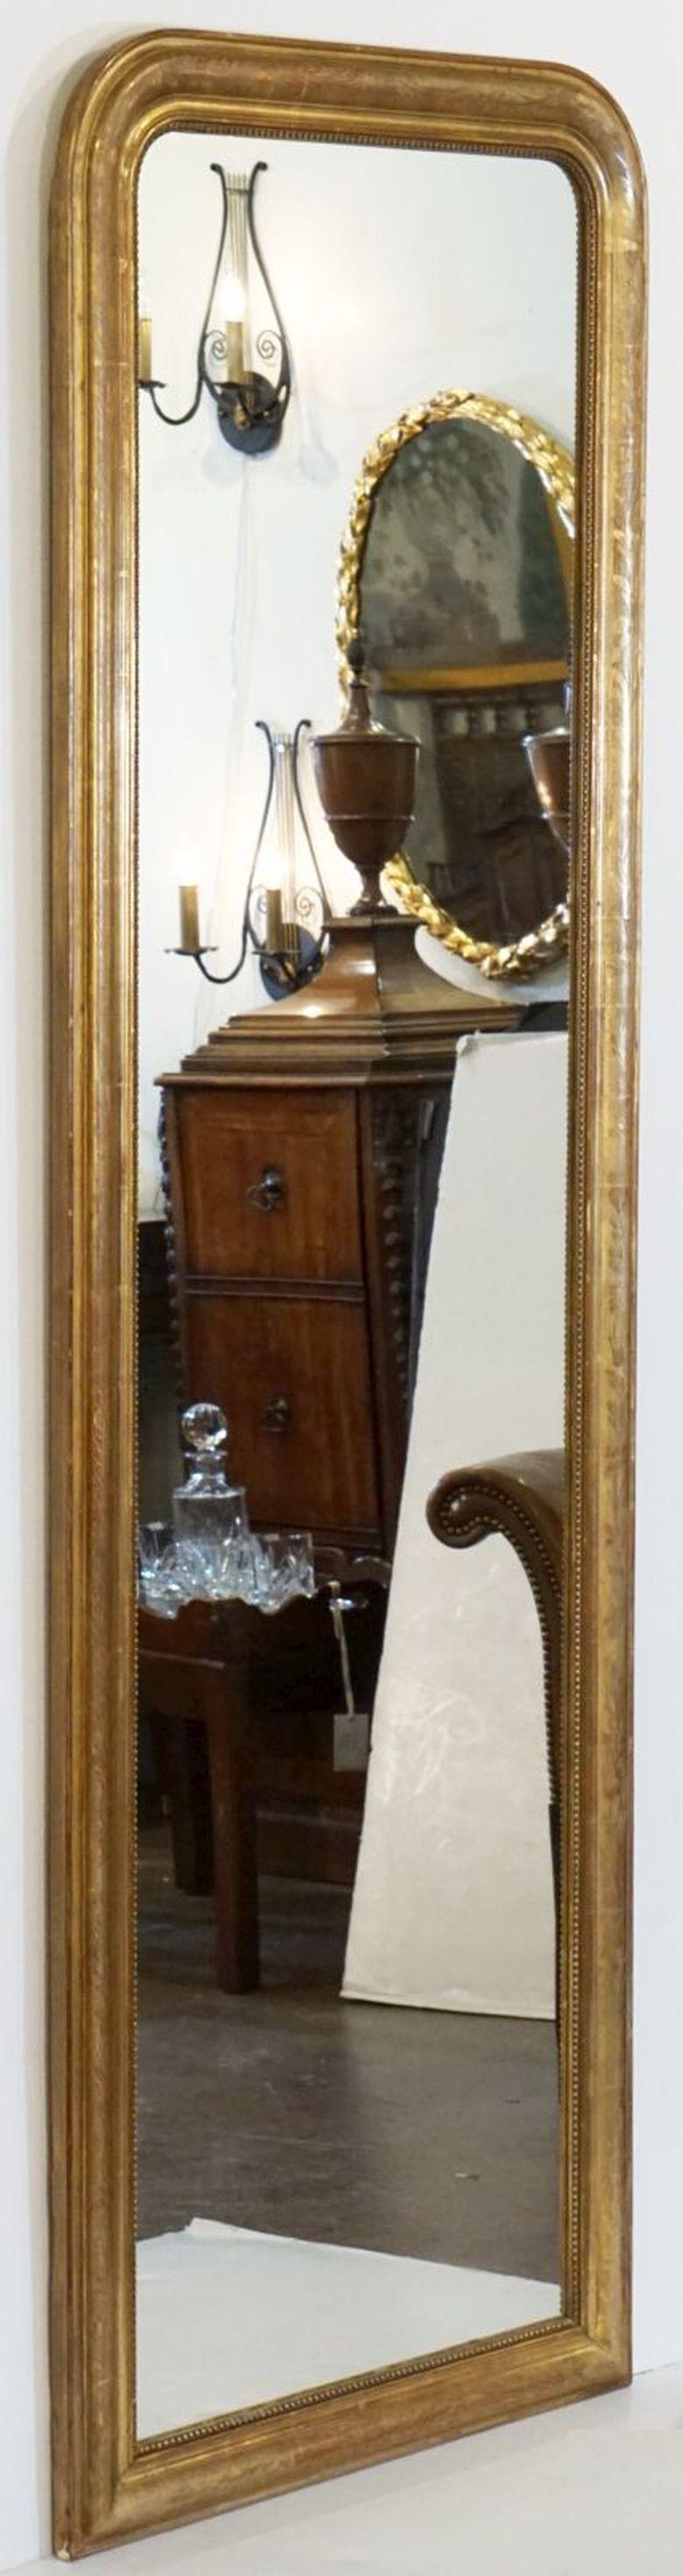 A fine tall Louis Philippe wall or dressing console mirror from France, featuring a moulded surround with a beautiful patinated gold-leaf. Perfect for use as a dressing or alcove floor mirror, the frame has a decorative flower and leaf design etched